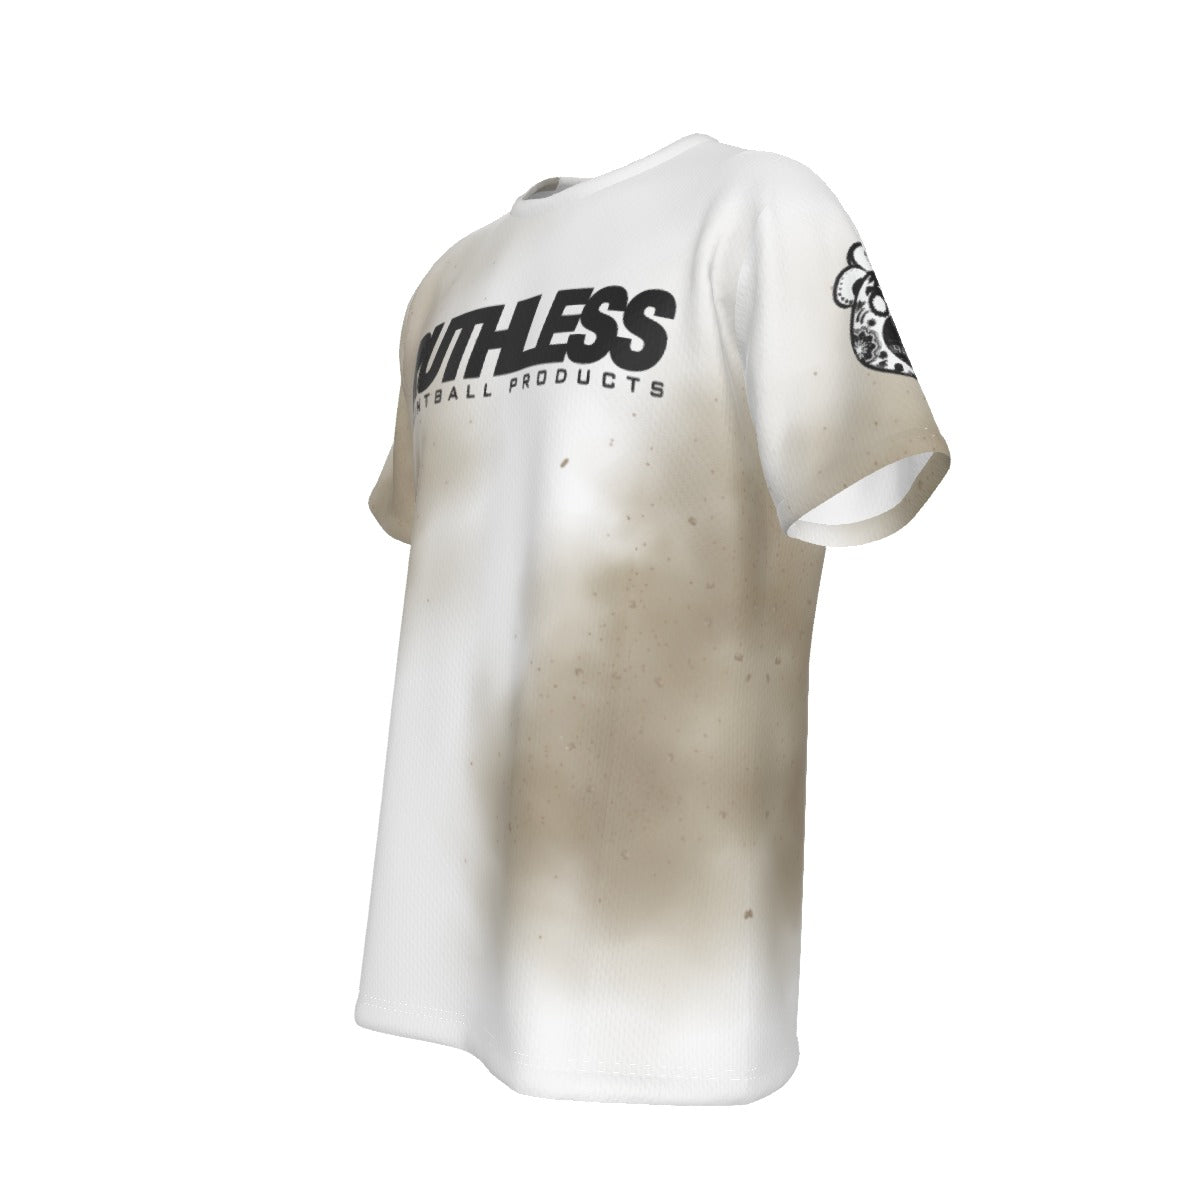 Ruthless Dirty White Tee